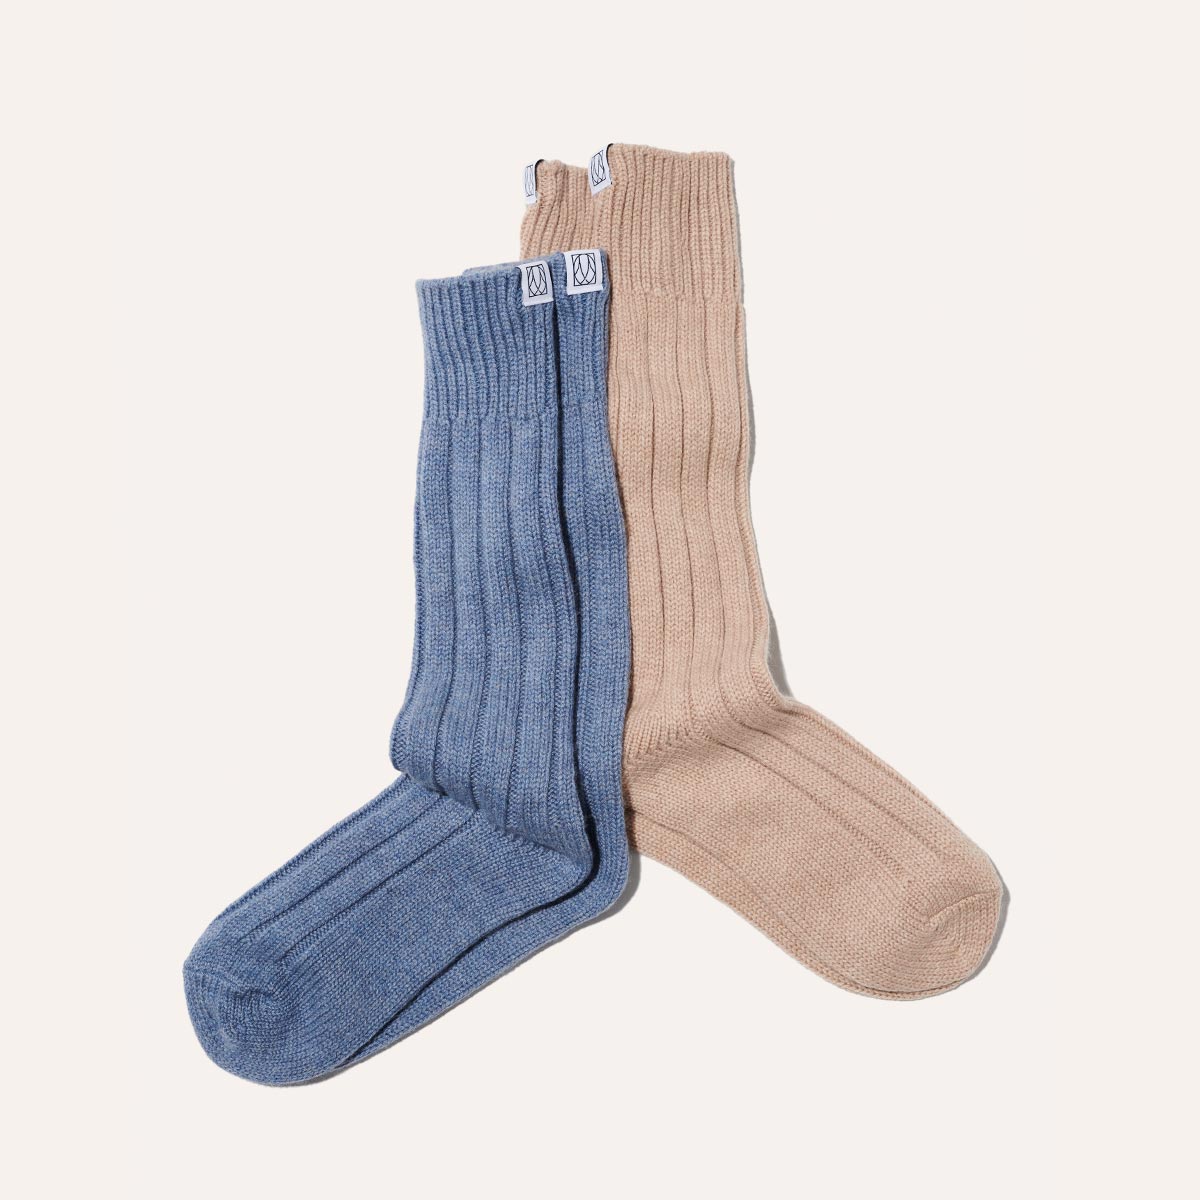 The Cozy Sock - Box Set in Light Blue and Oatmeal